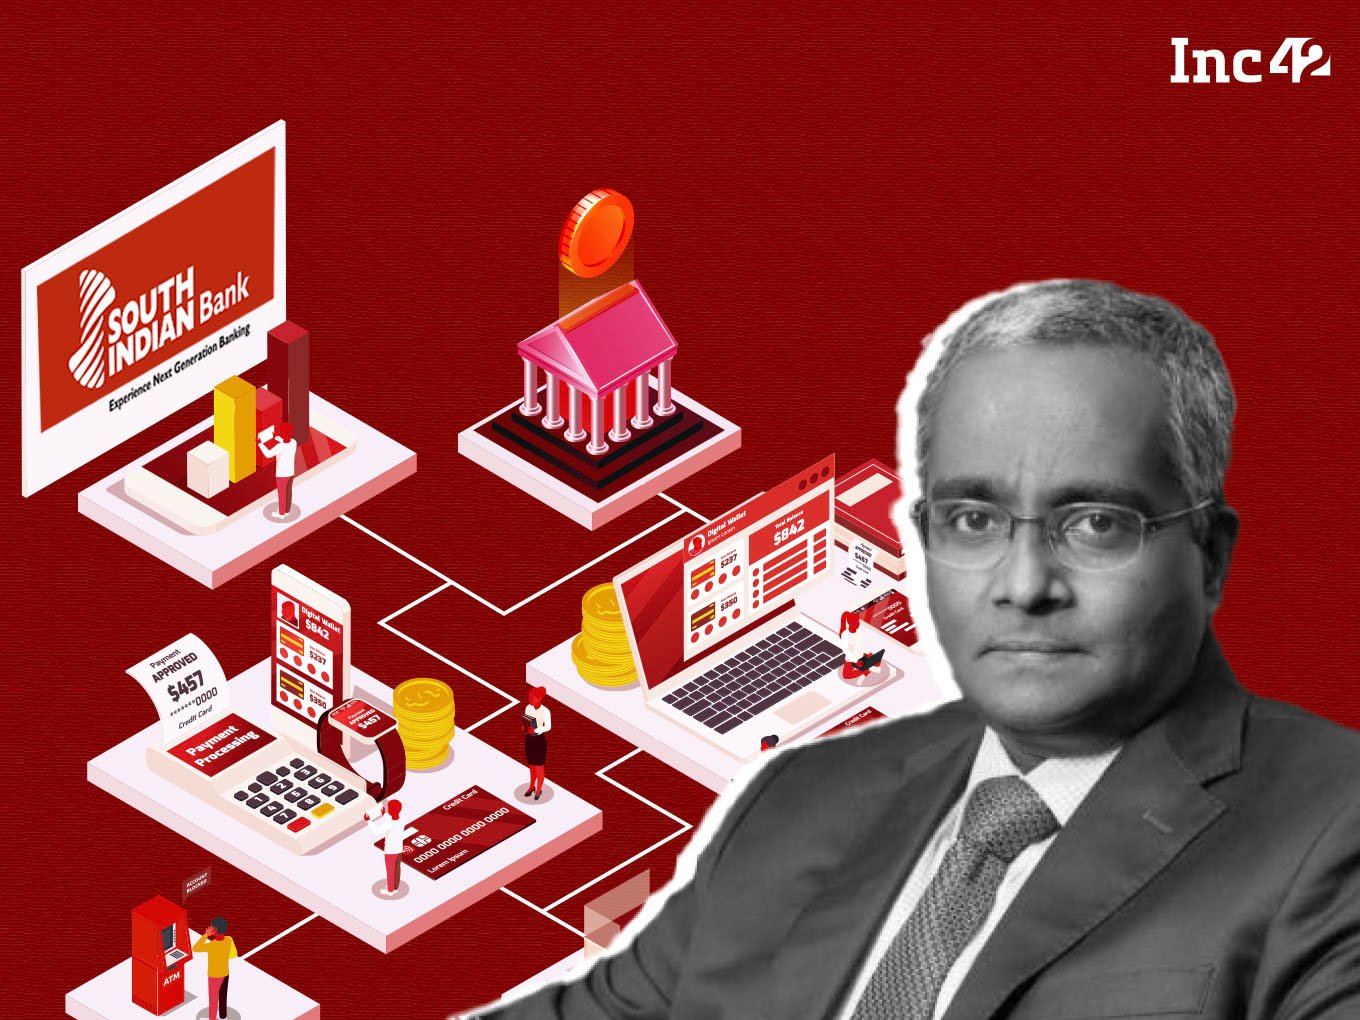 South Indian Bank Gears Up To Launch Digital Banking Unit, Looks To Tie Up With Fintech Aggregators